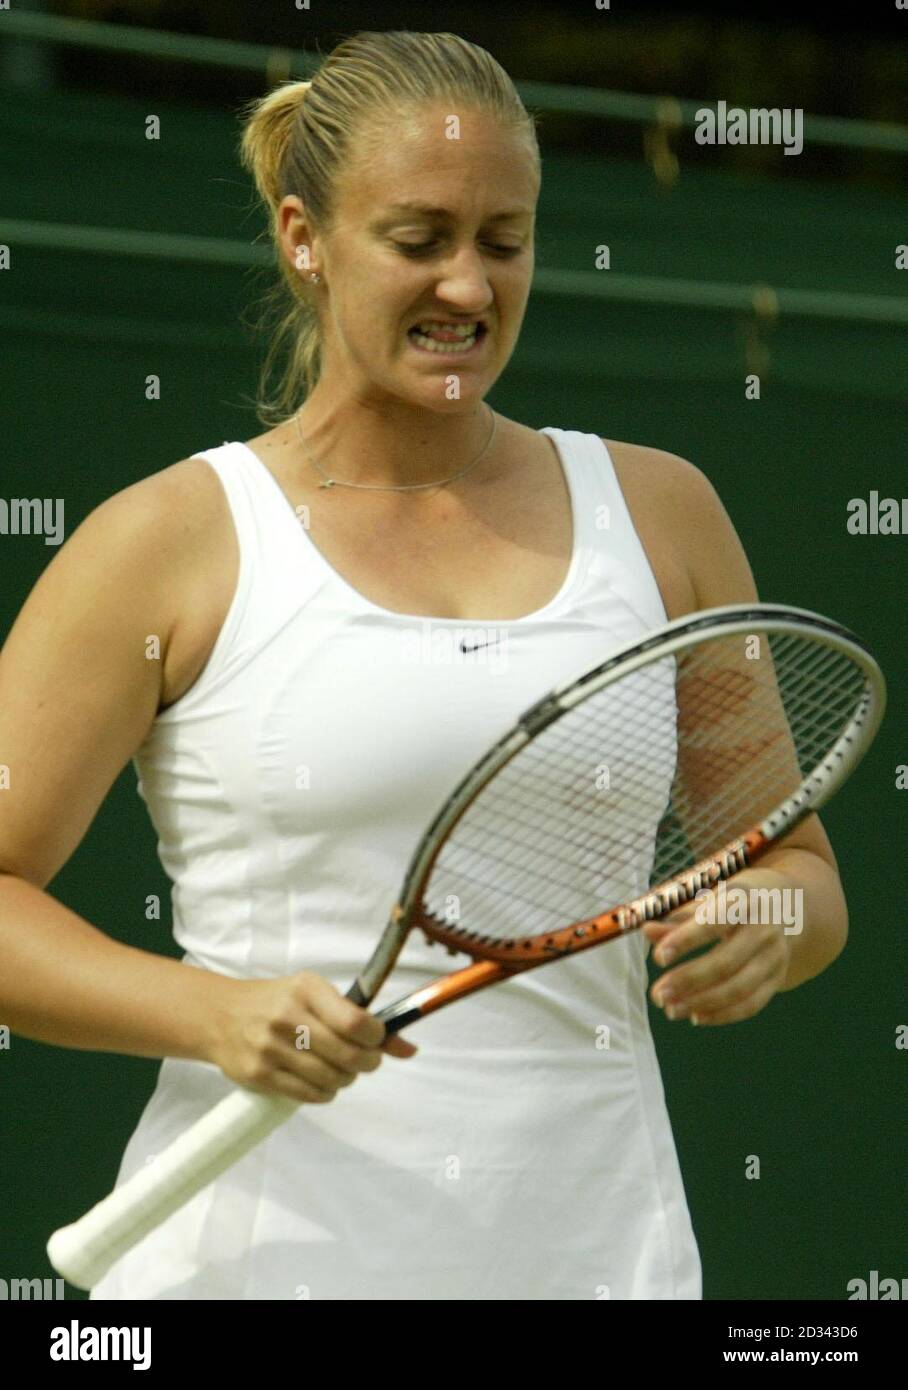 Mary Pierce from France crashes out of Wimbledon, losing in straight sets to Justine Henin-Hardenne from Belgium 6:3/6:3 in the fourth round of the All England Lawn Tennis Championships at Wimbledon. Stock Photo